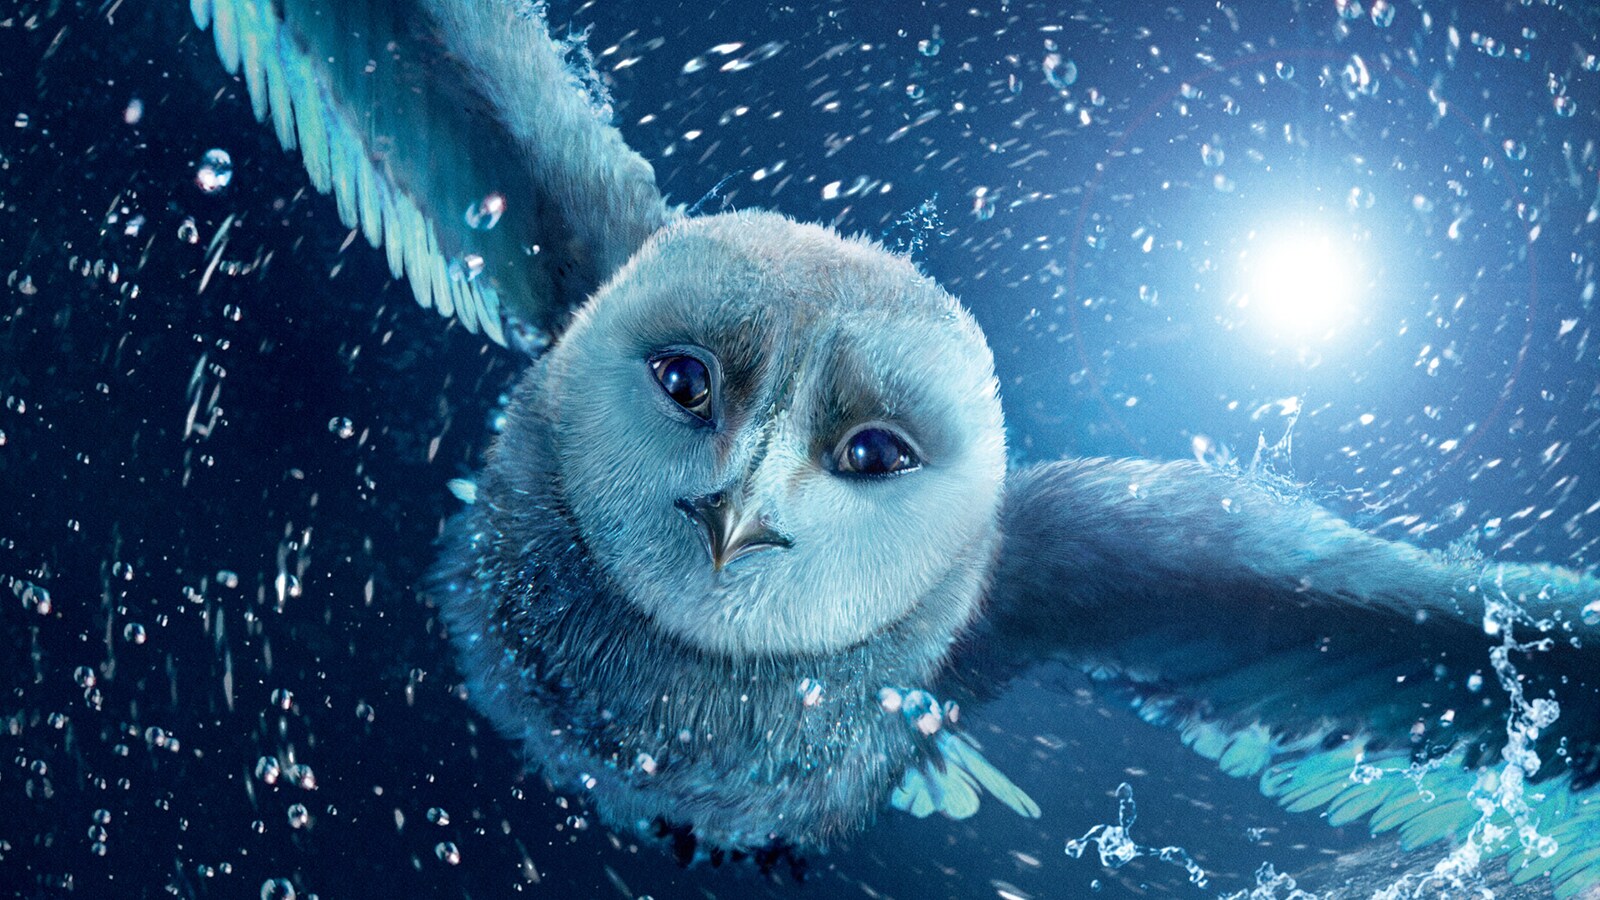 legend-of-the-guardians-the-owls-of-gahoole-2010